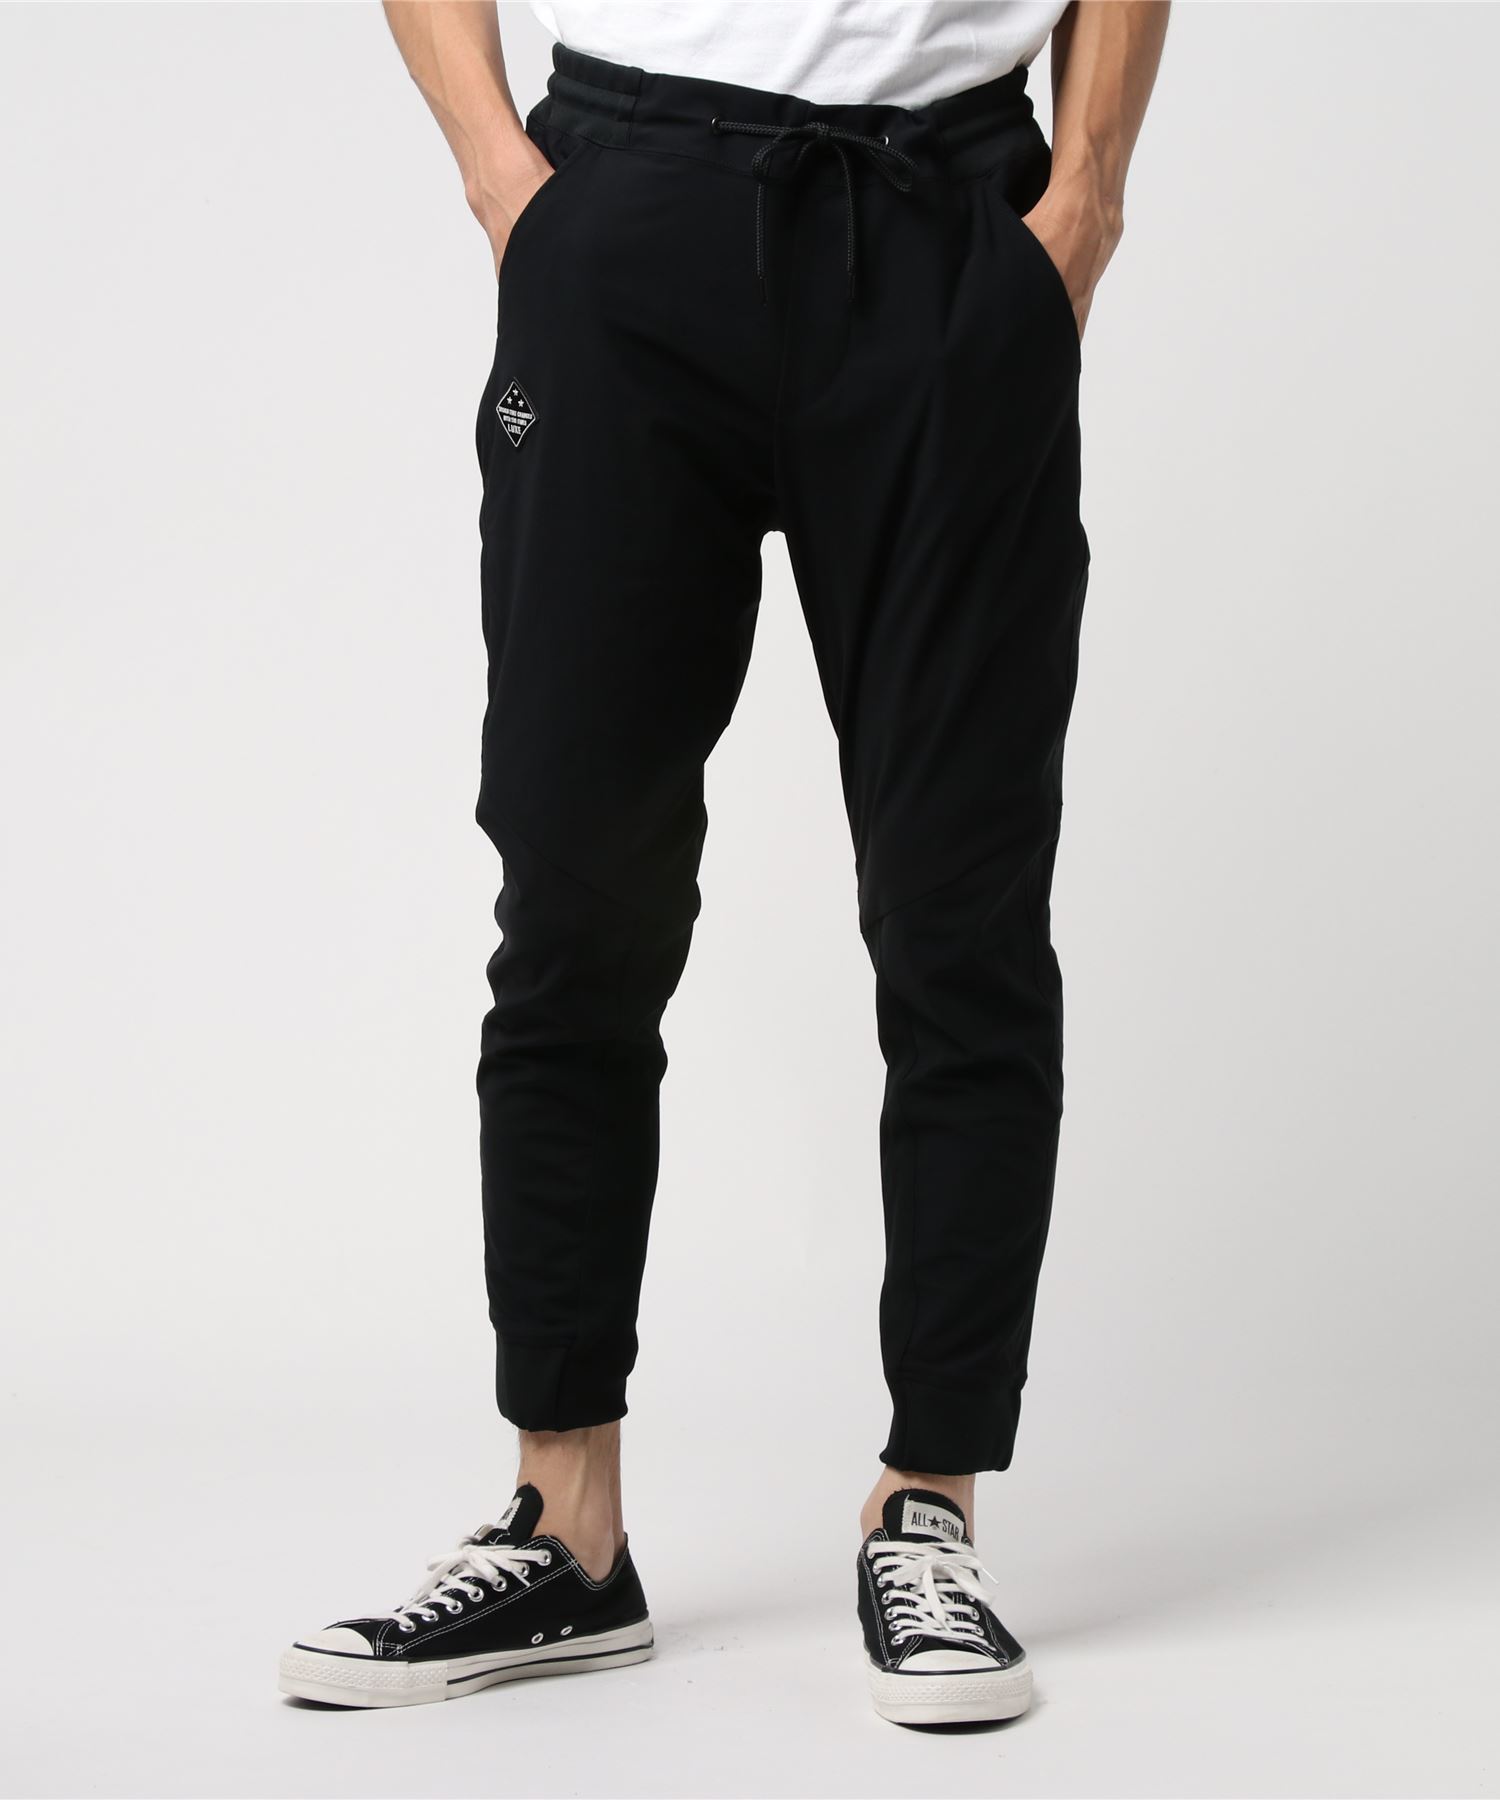 AKM BrownBunnyLUXSPO LIGHT 新製品情報も満載 AIR TECH EASY WITH PATCH PANTS SALE 98%OFF SPORT